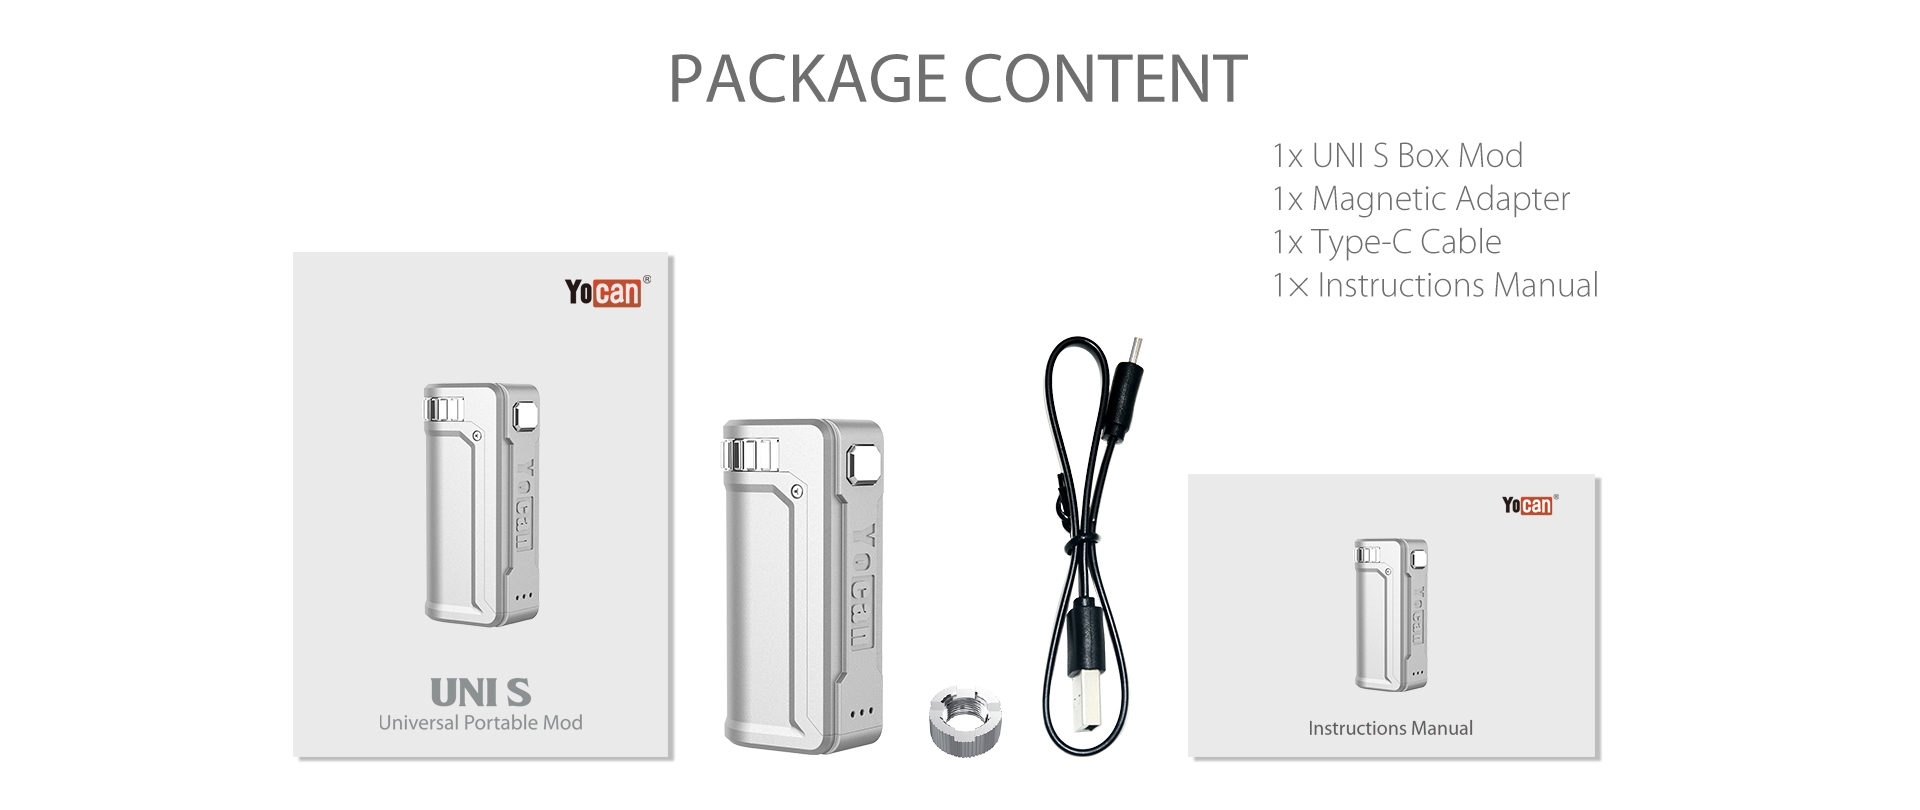 Yocan UNI S - Package